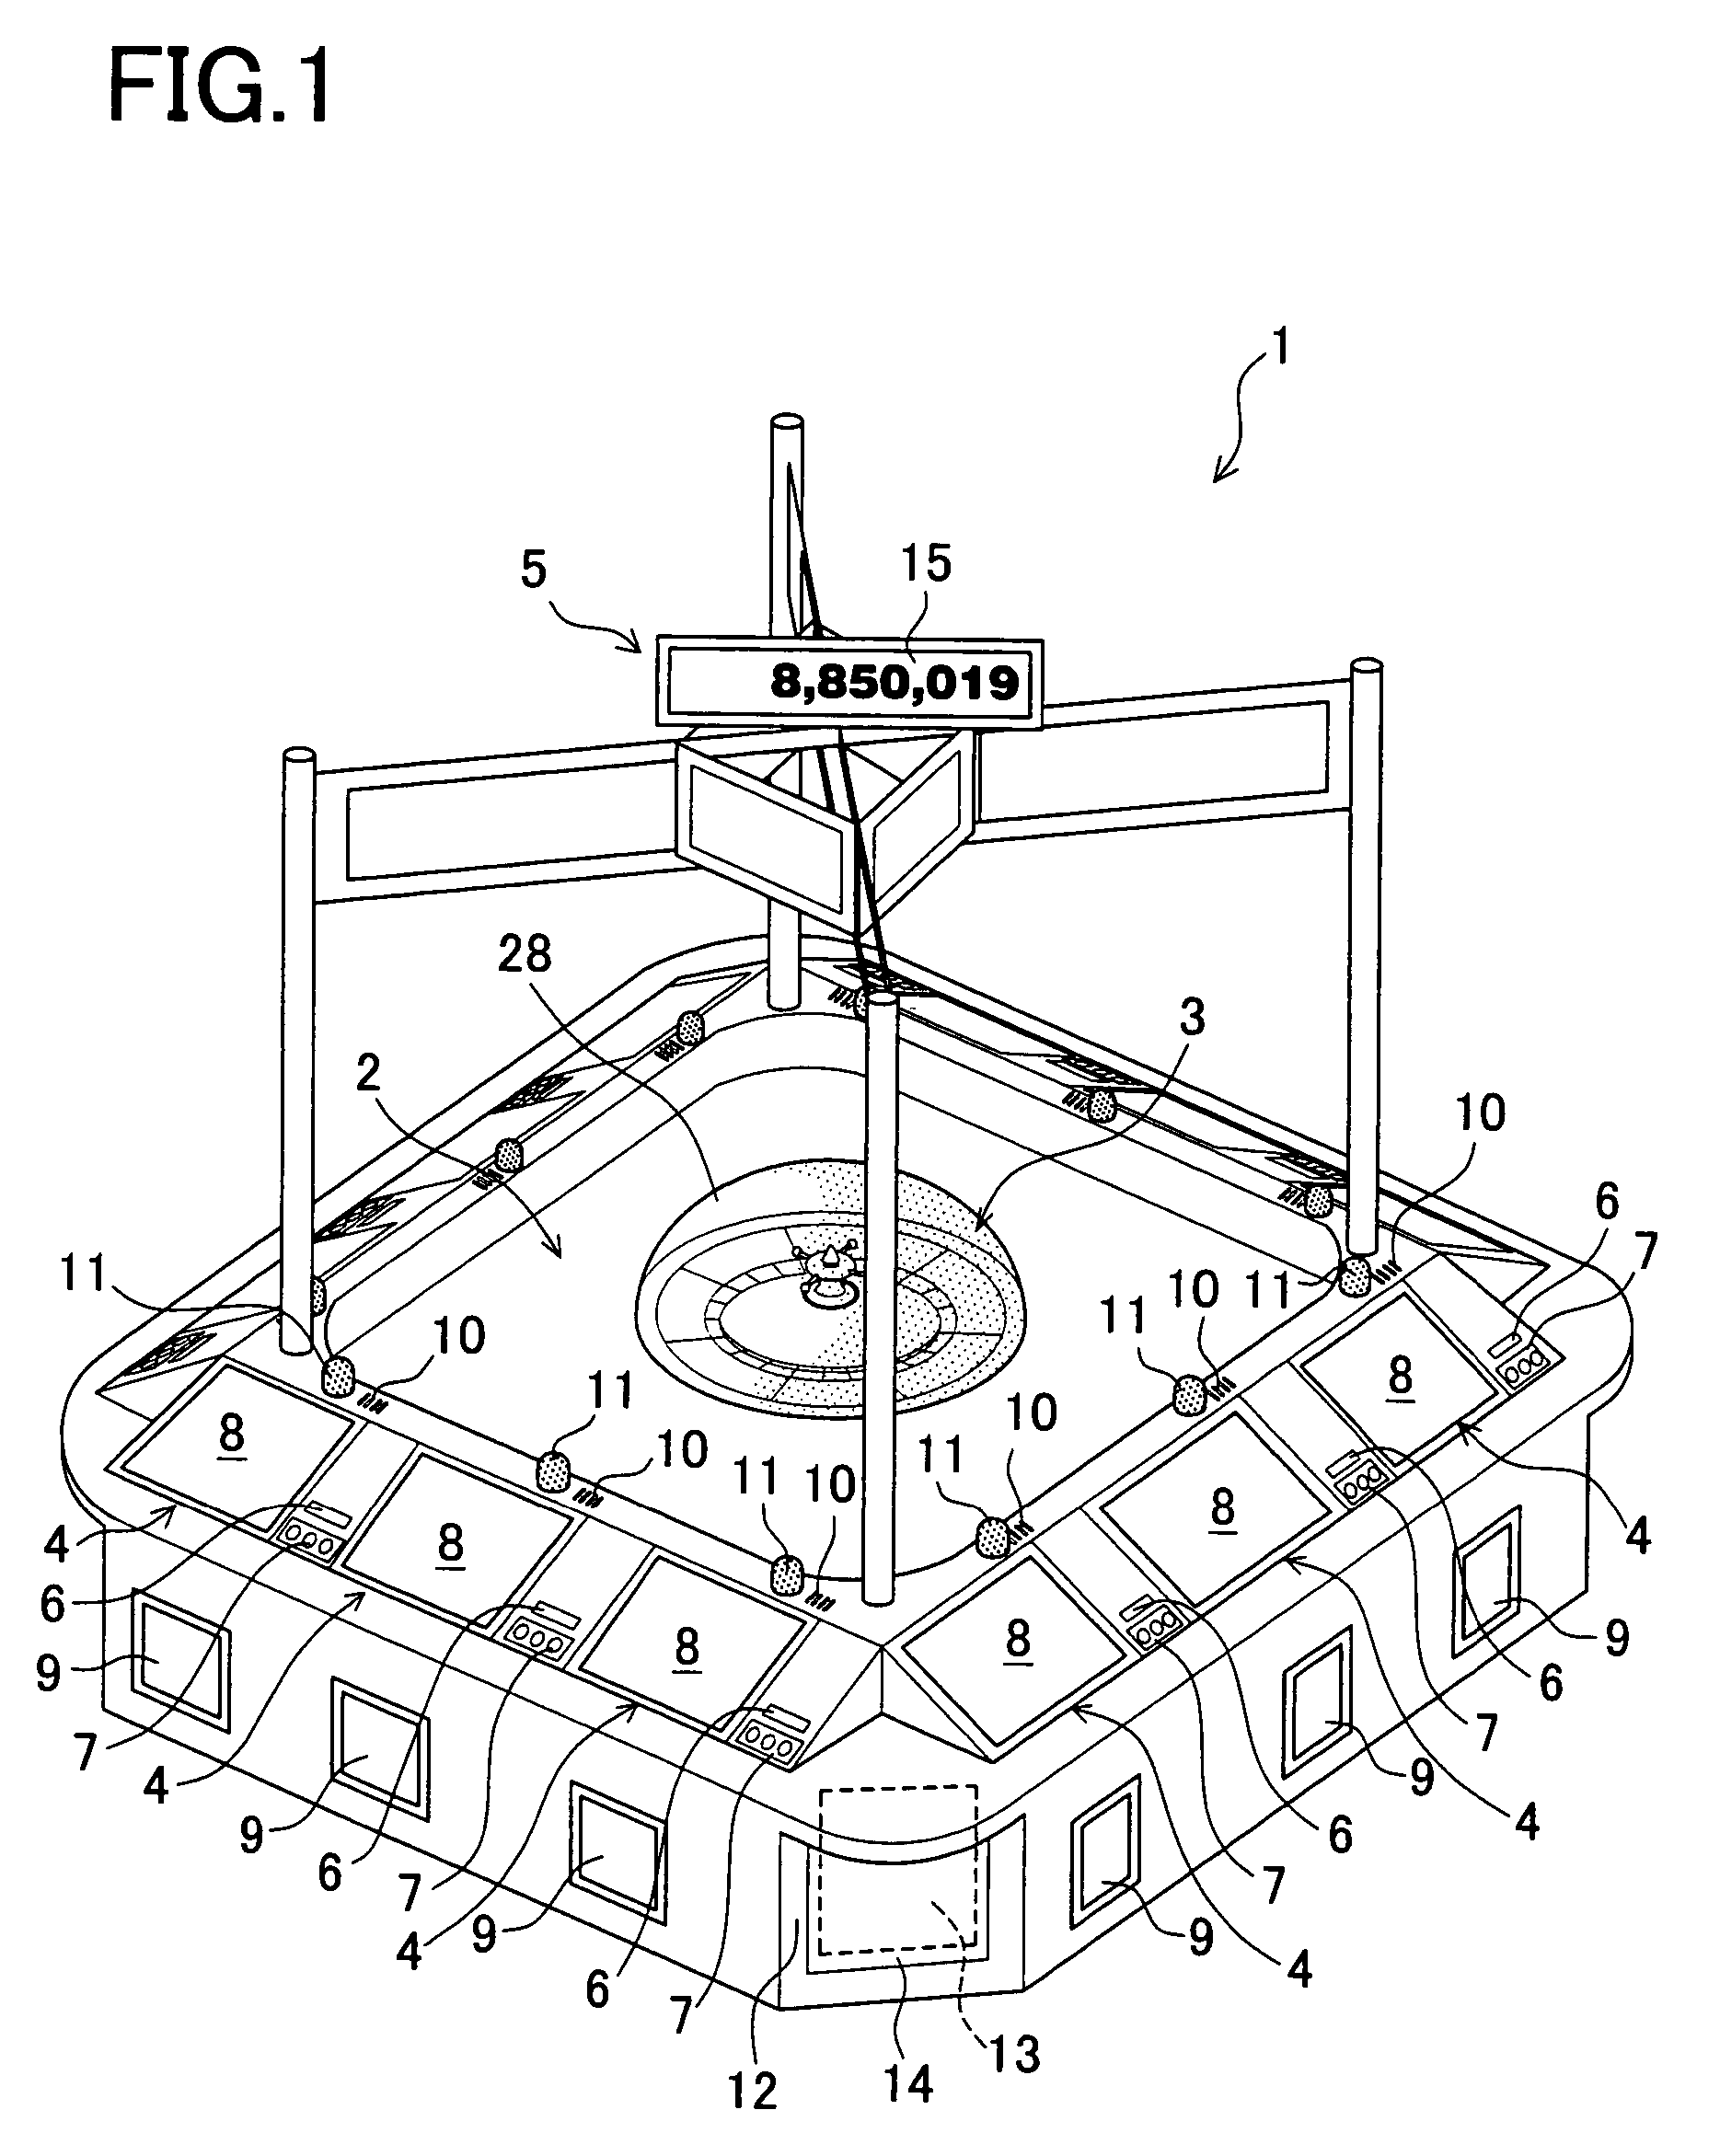 Gaming machine including a wheel and a processor to specify a pocket of the wheel